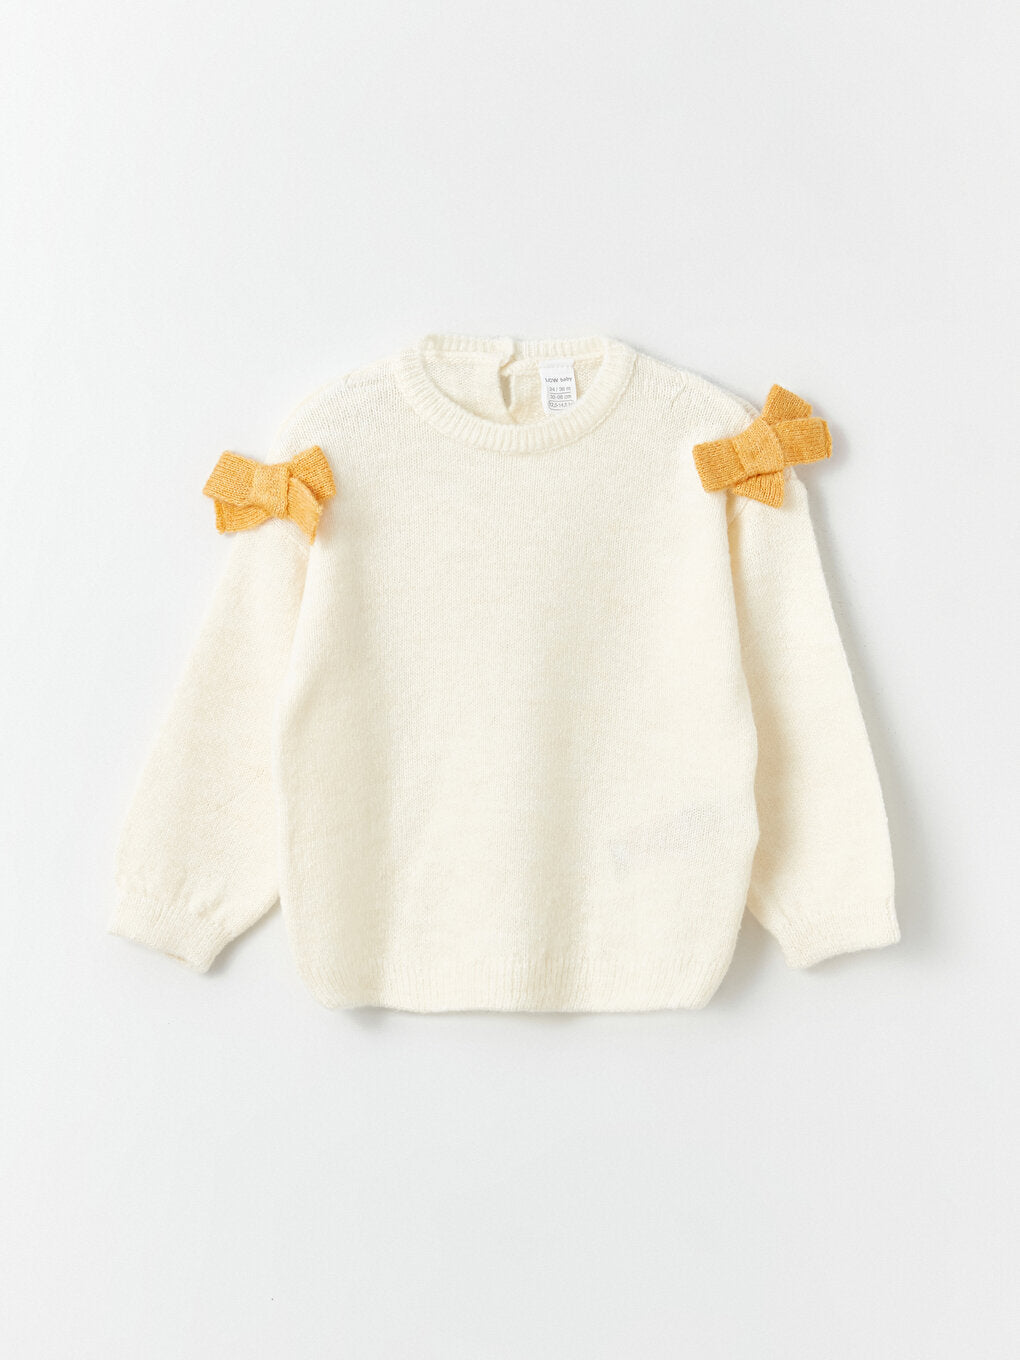 Crew Neck Baby Girl Knitwear Sweater And Trousers 2-Pack